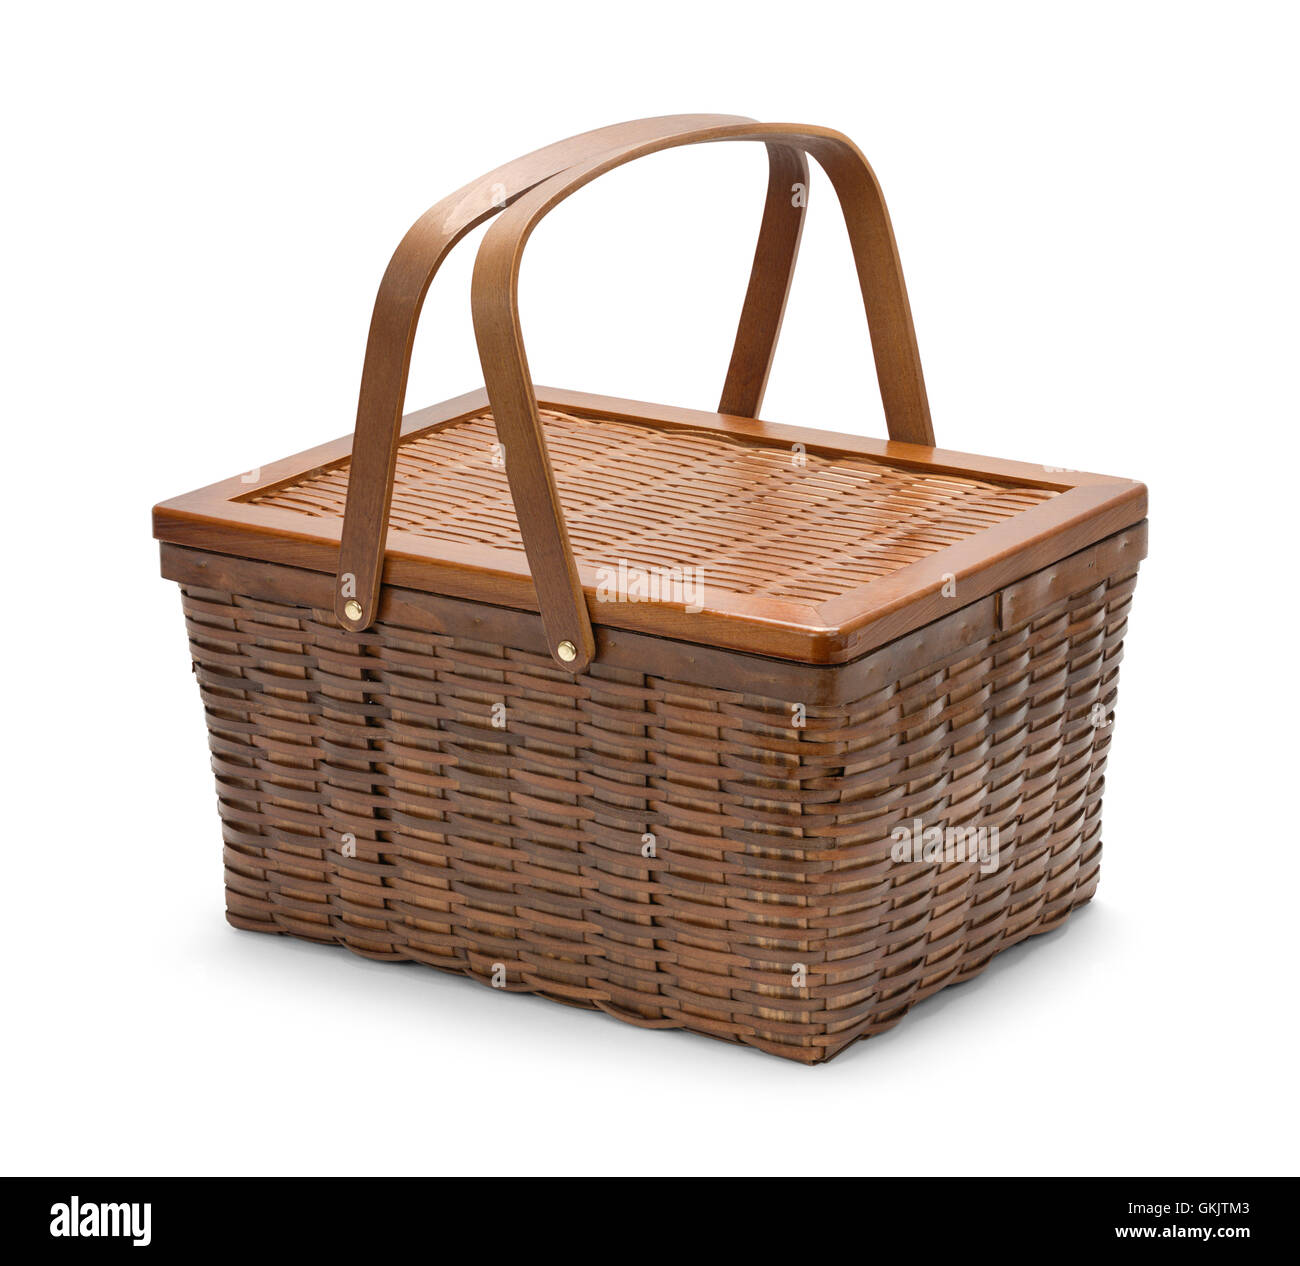 Classic Wicker Picnic Basket Isolated on White Background. Stock Photo